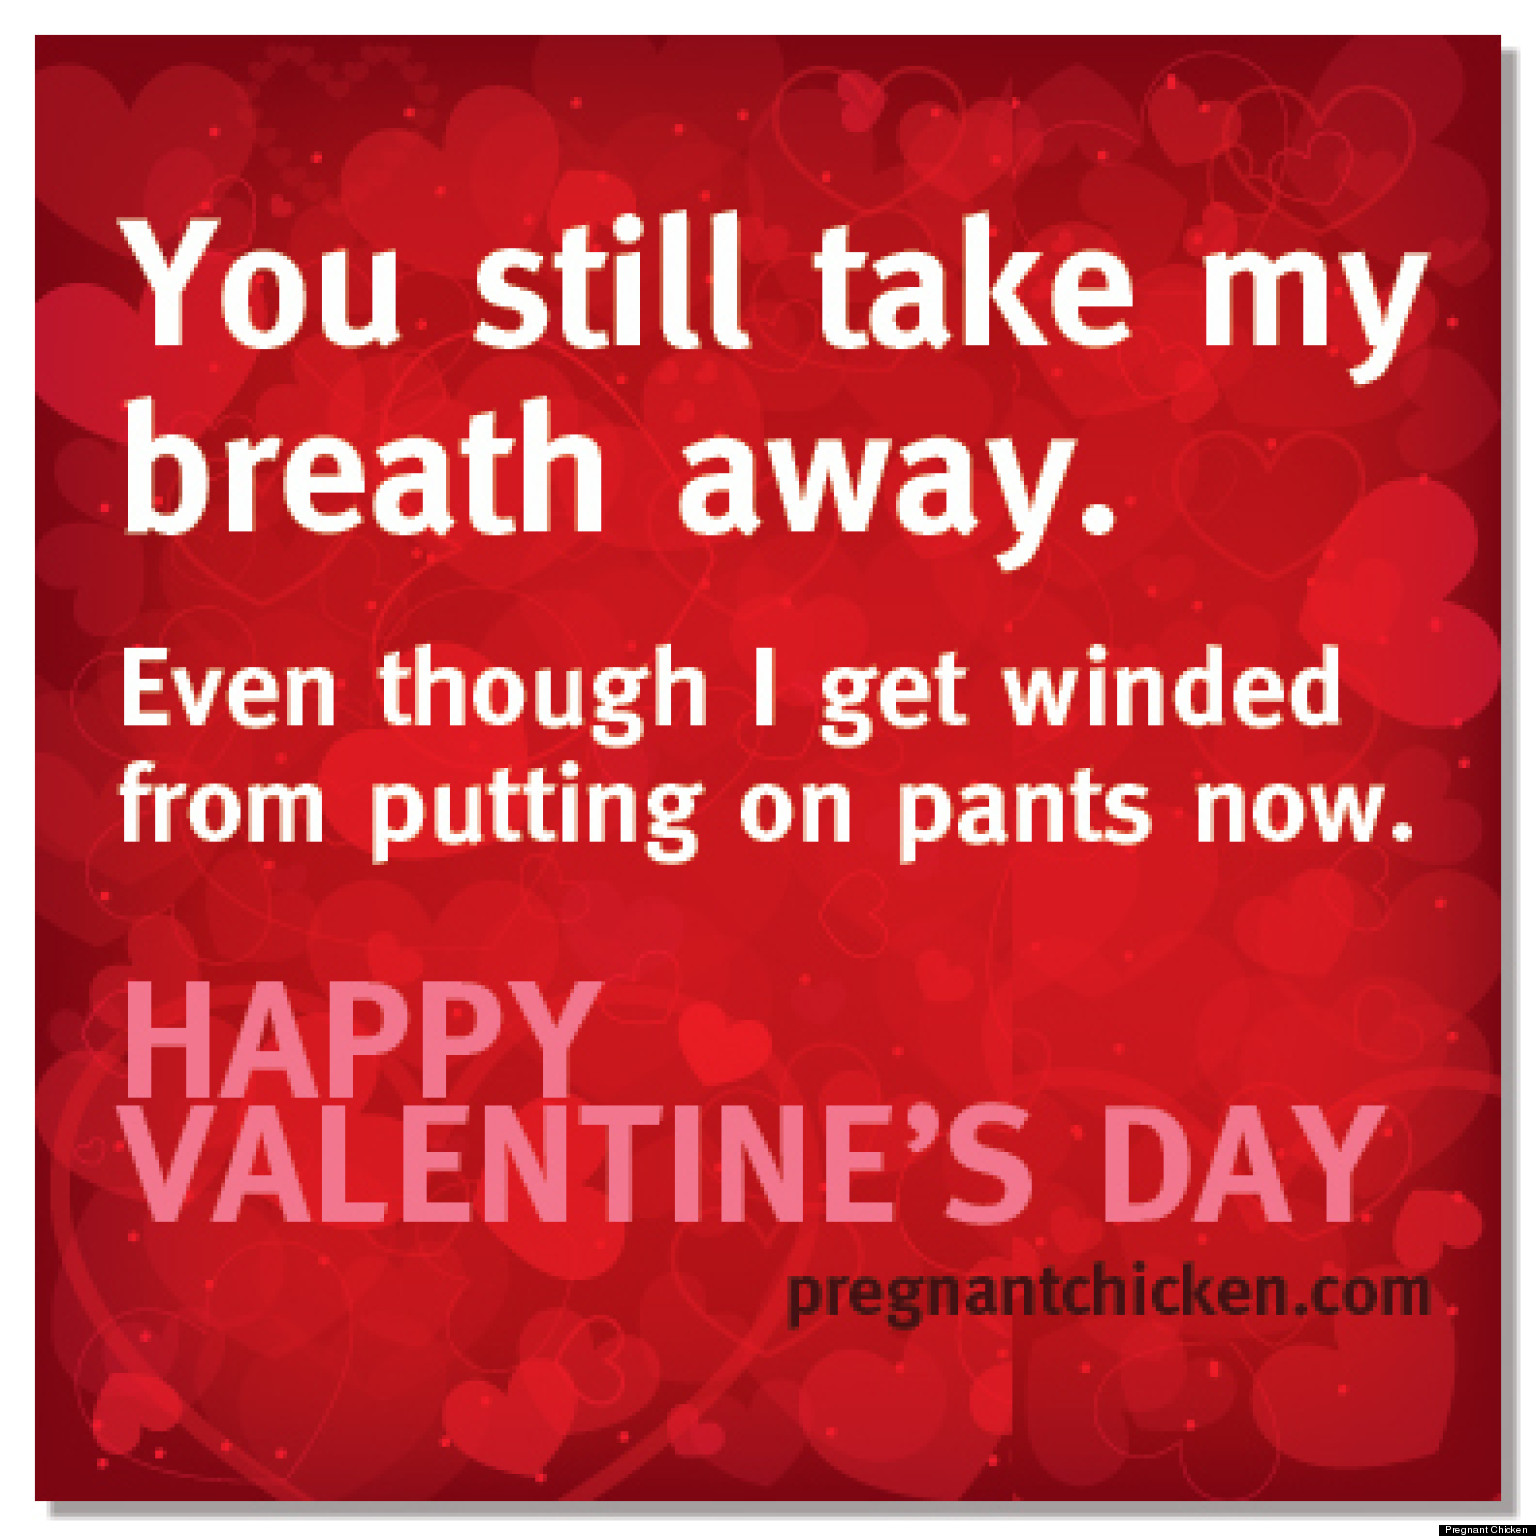 Funny Valentines For Pregnant Women To Give Their Partners (PHOTOS) | HuffPost